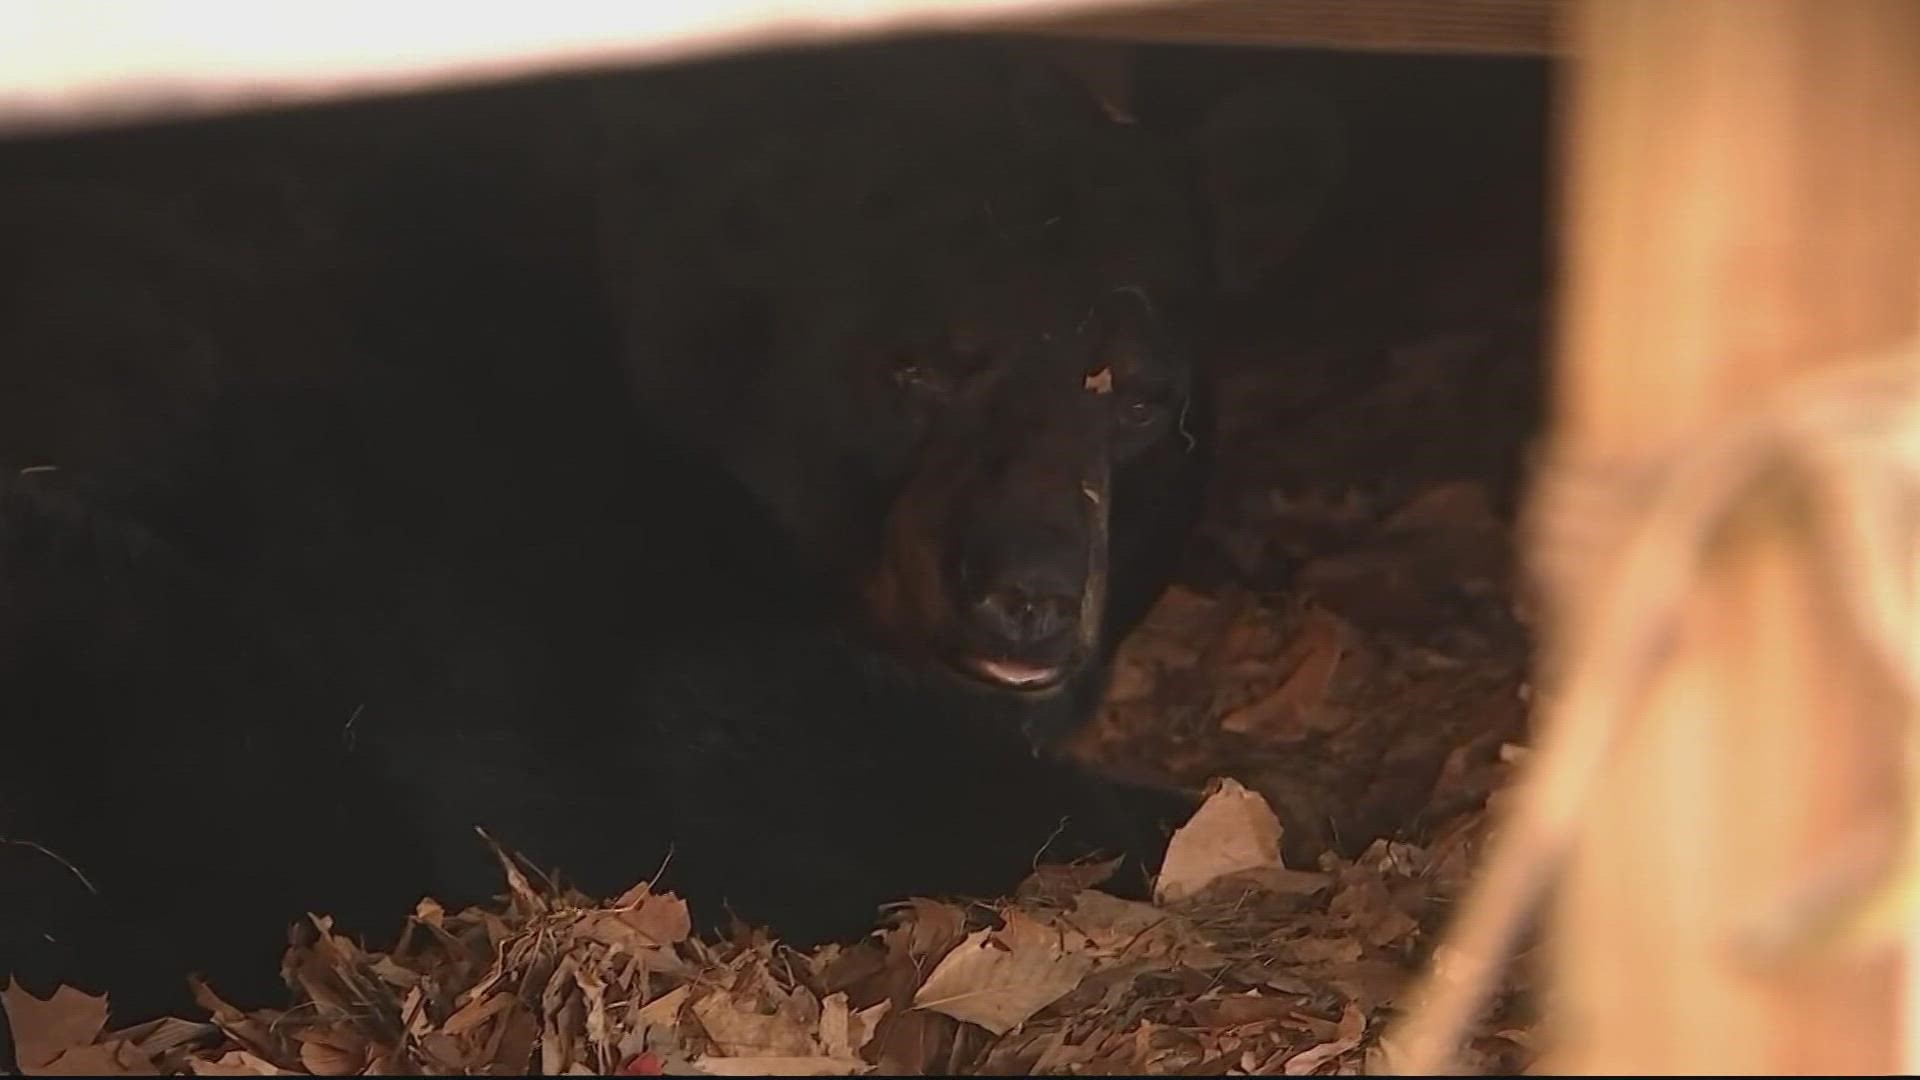 When the family dog started barking at 'something' under this family's porch in Connecticut, that 'something' turned out to be a big 'ol bear.